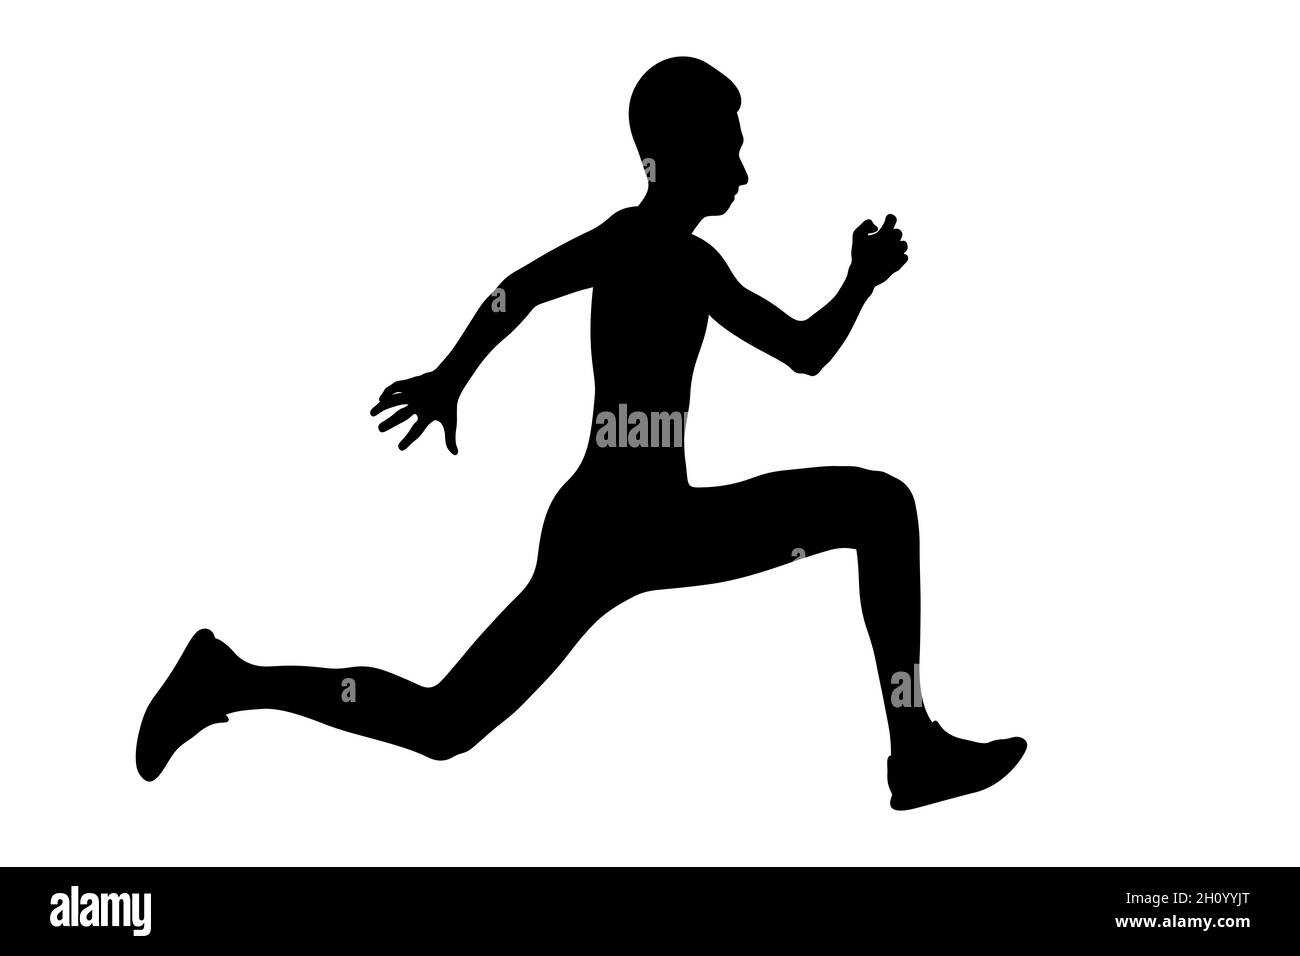 young athlete jumper triple jump black silhouette Stock Photo